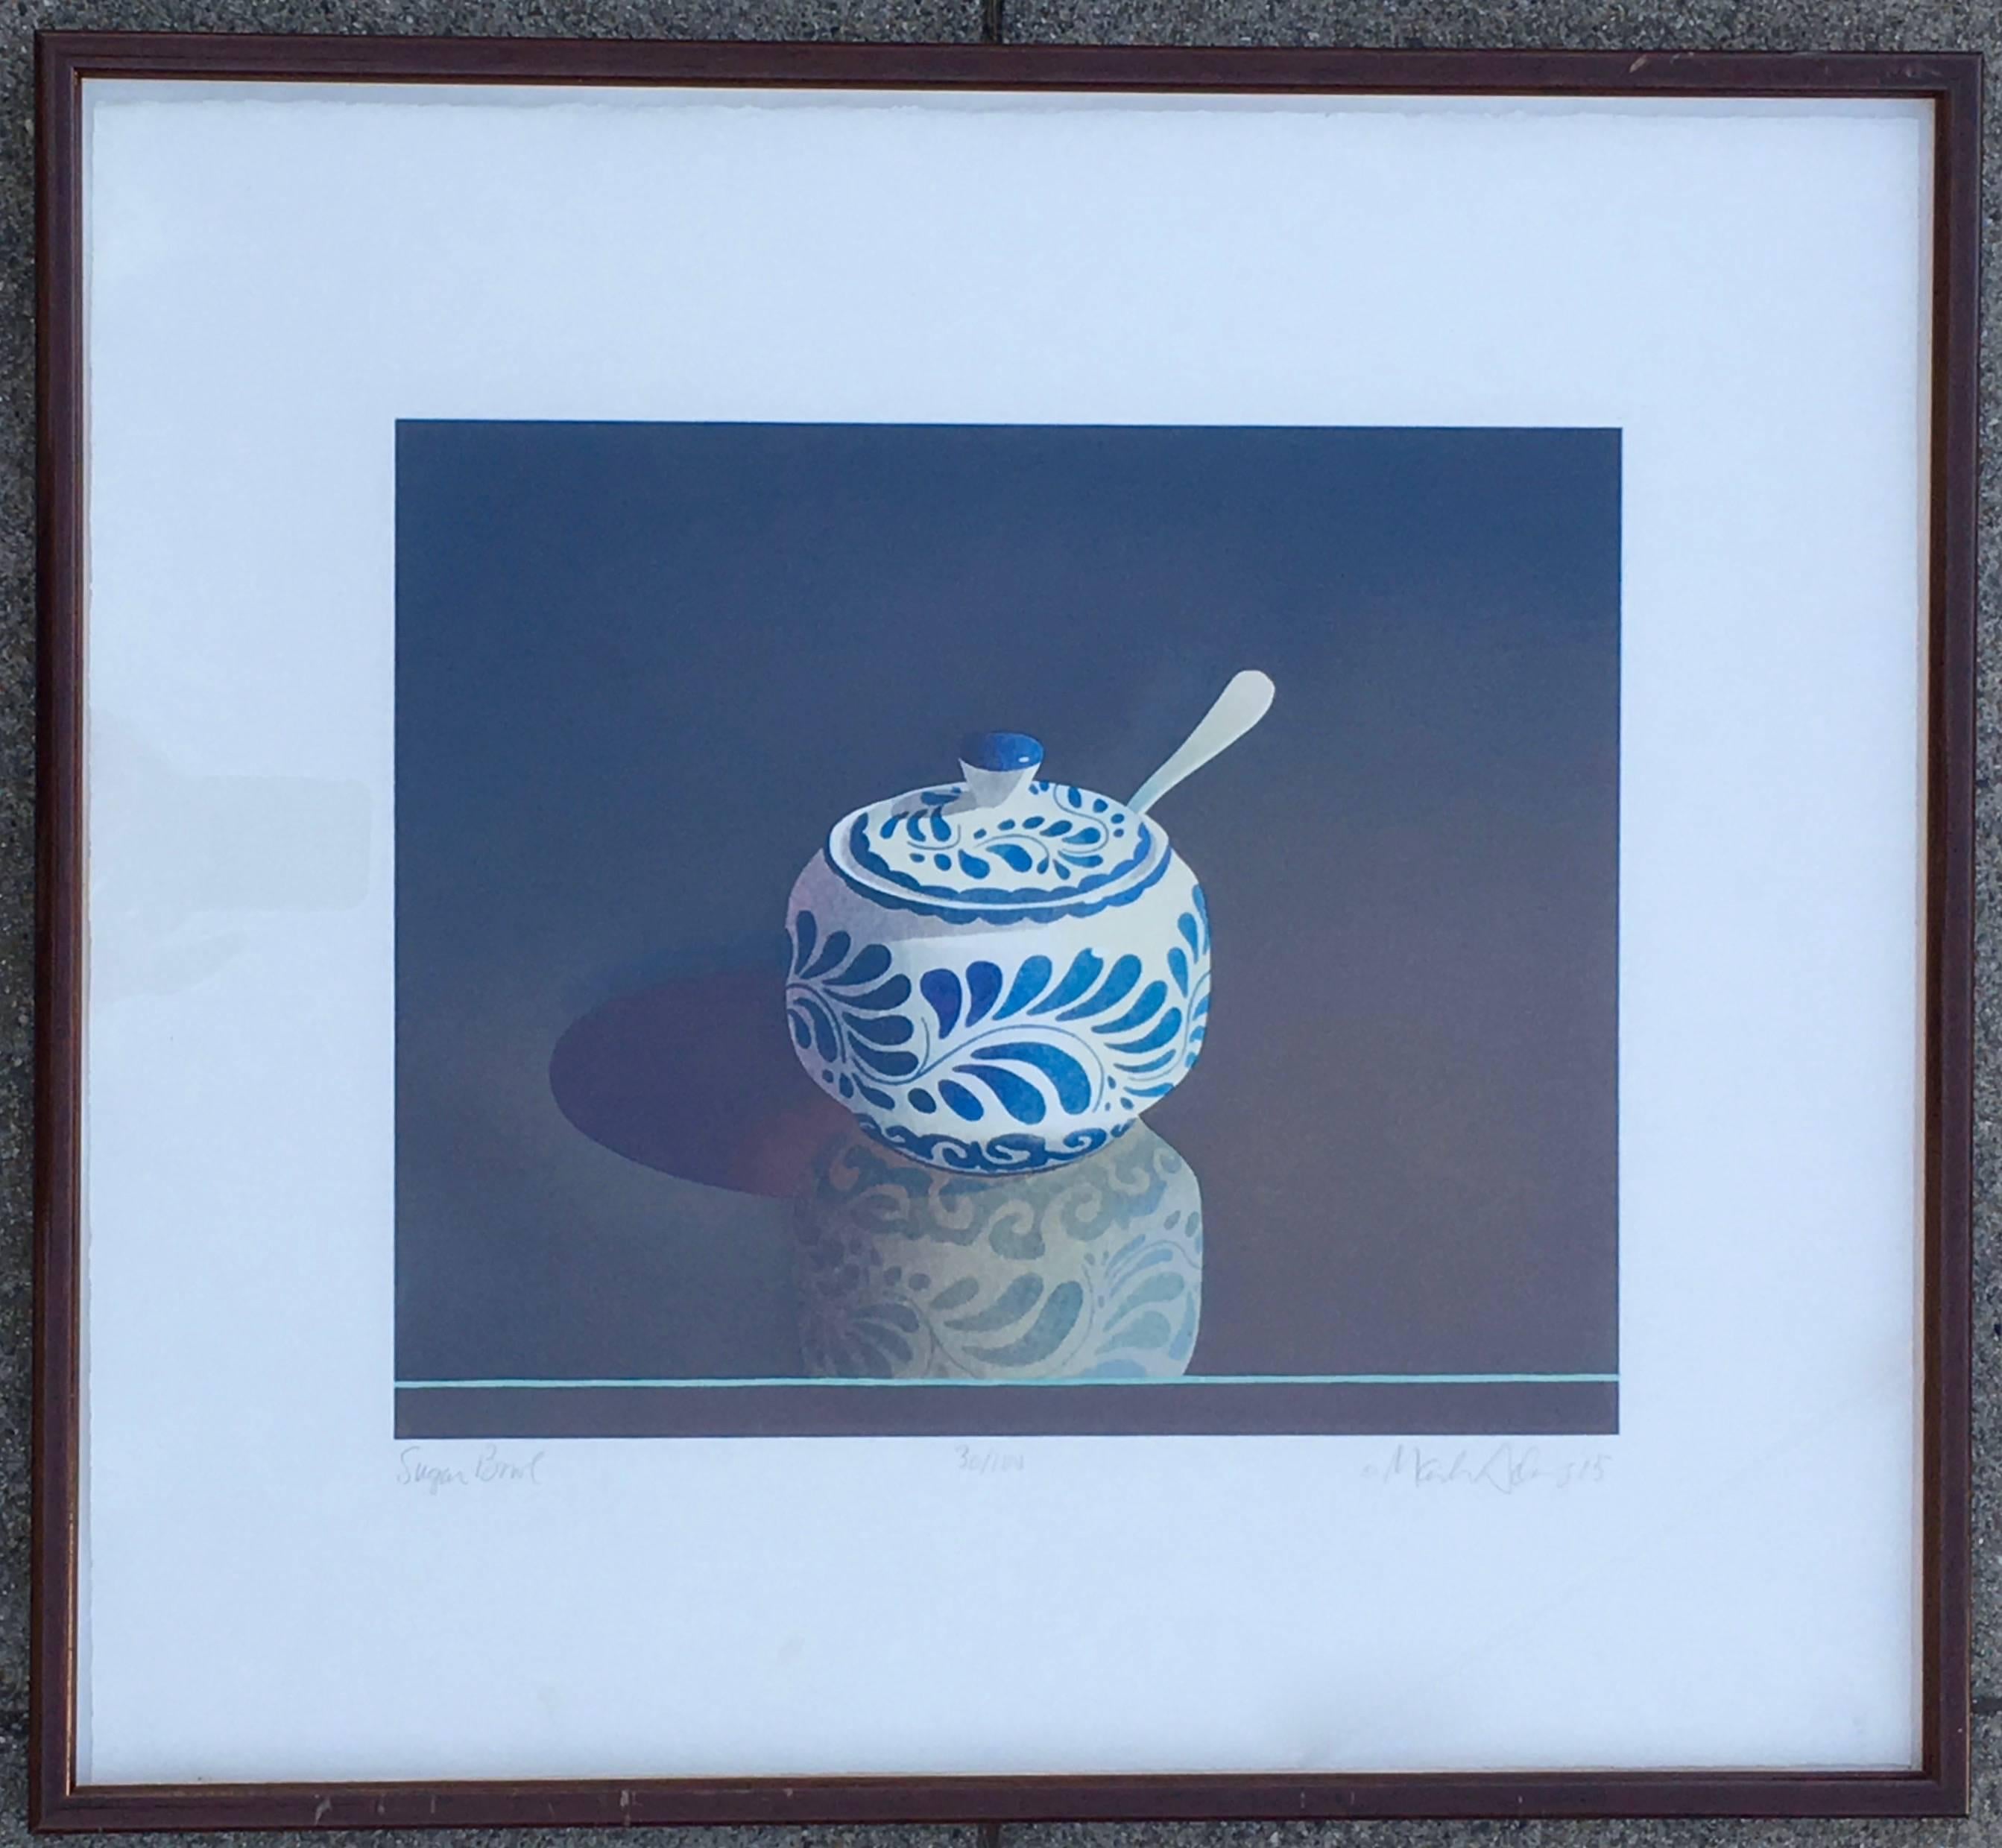 Mark Adams.
Sugar cup,
1985.
Lithograph on paper.
13 x 15 3/4 (plus frame)
Signed, titled, and dated in lower margin.
Excellent condition.
Archivally framed.

Mark Adams (1925-2006) began his career in the 1950s making stained glass and